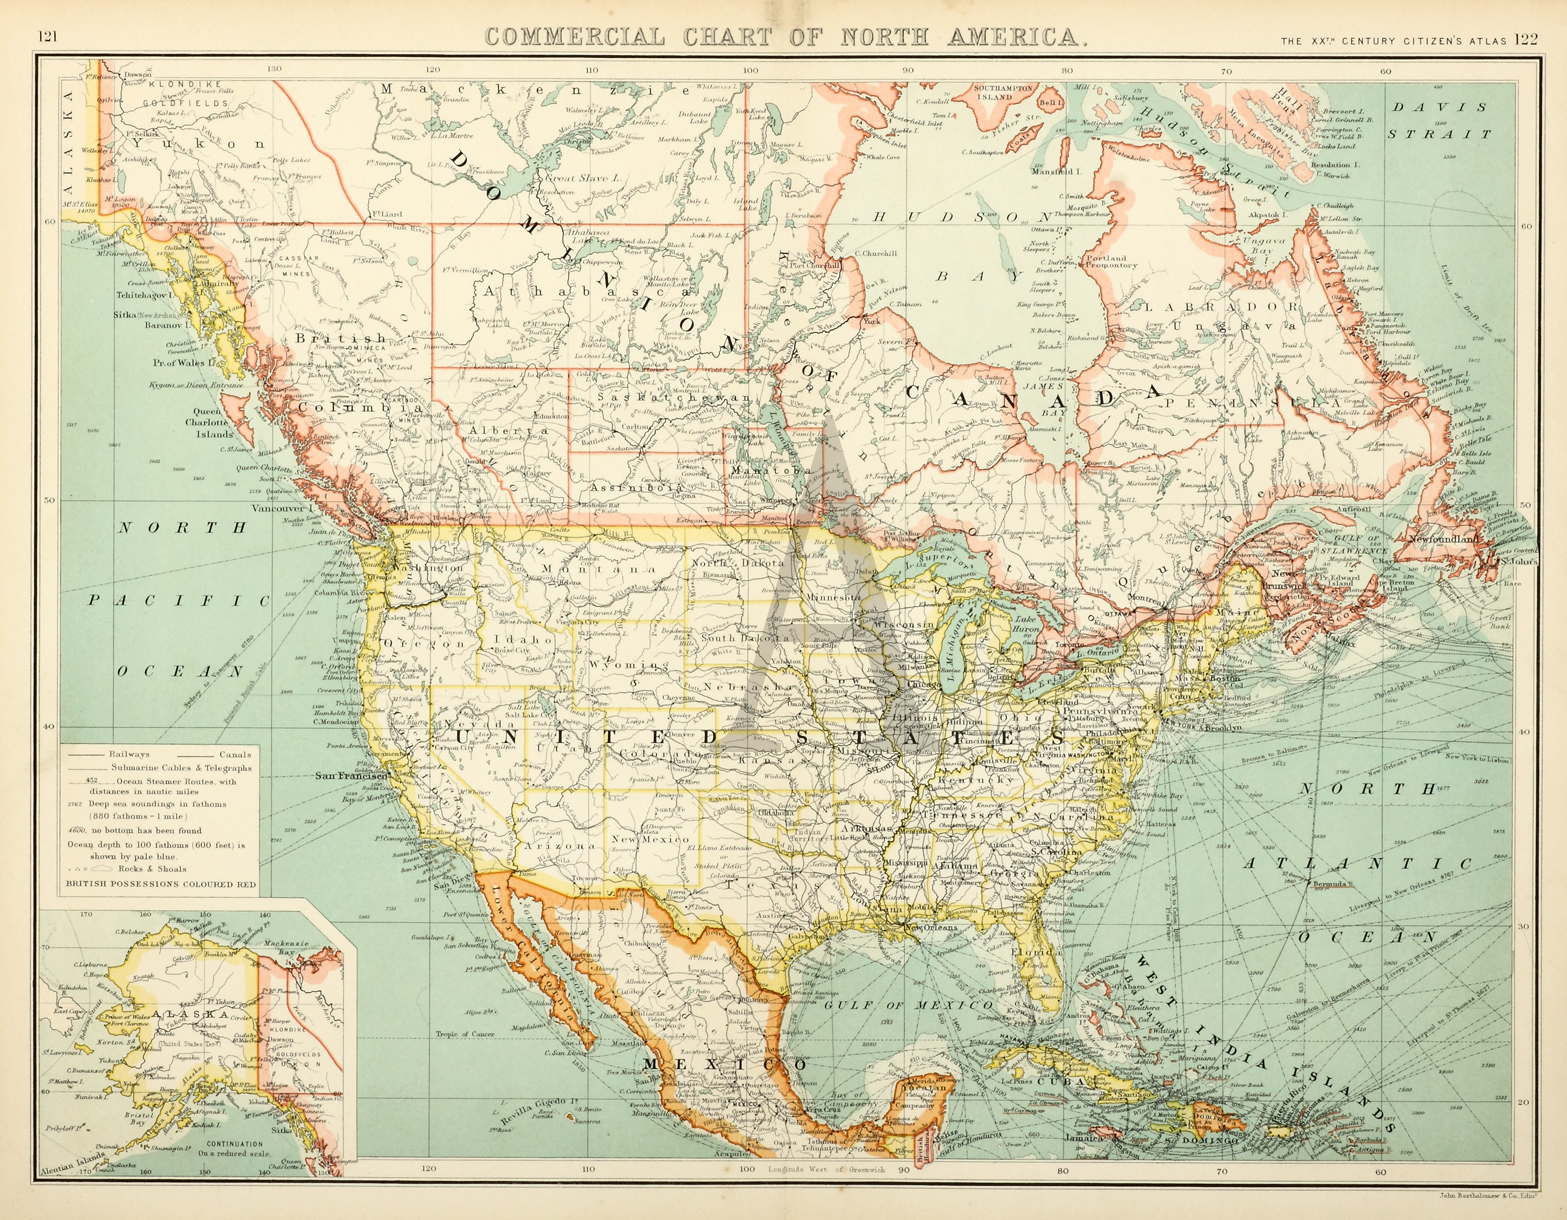 Commercial Chart of North America. - Antique Print from 1902